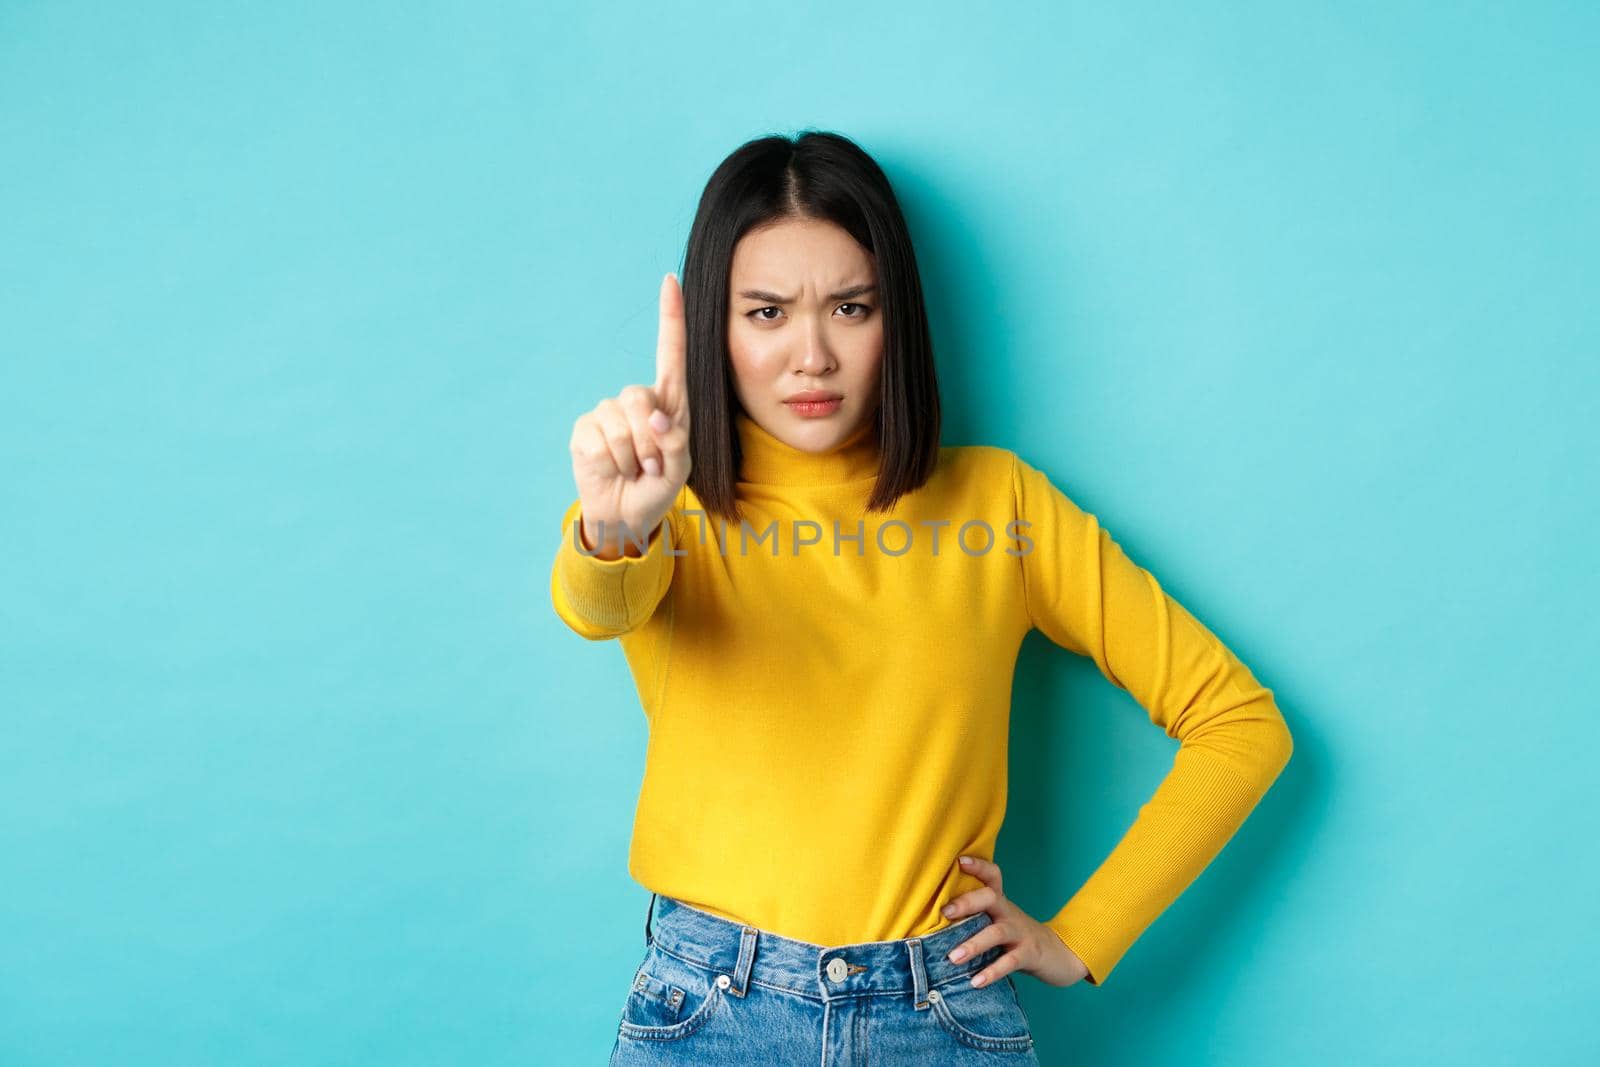 Confident and serious woman tell no, showing extended finger to stop and prohibit something bad, frowning and looking at camera self-assured, standing over blue background.